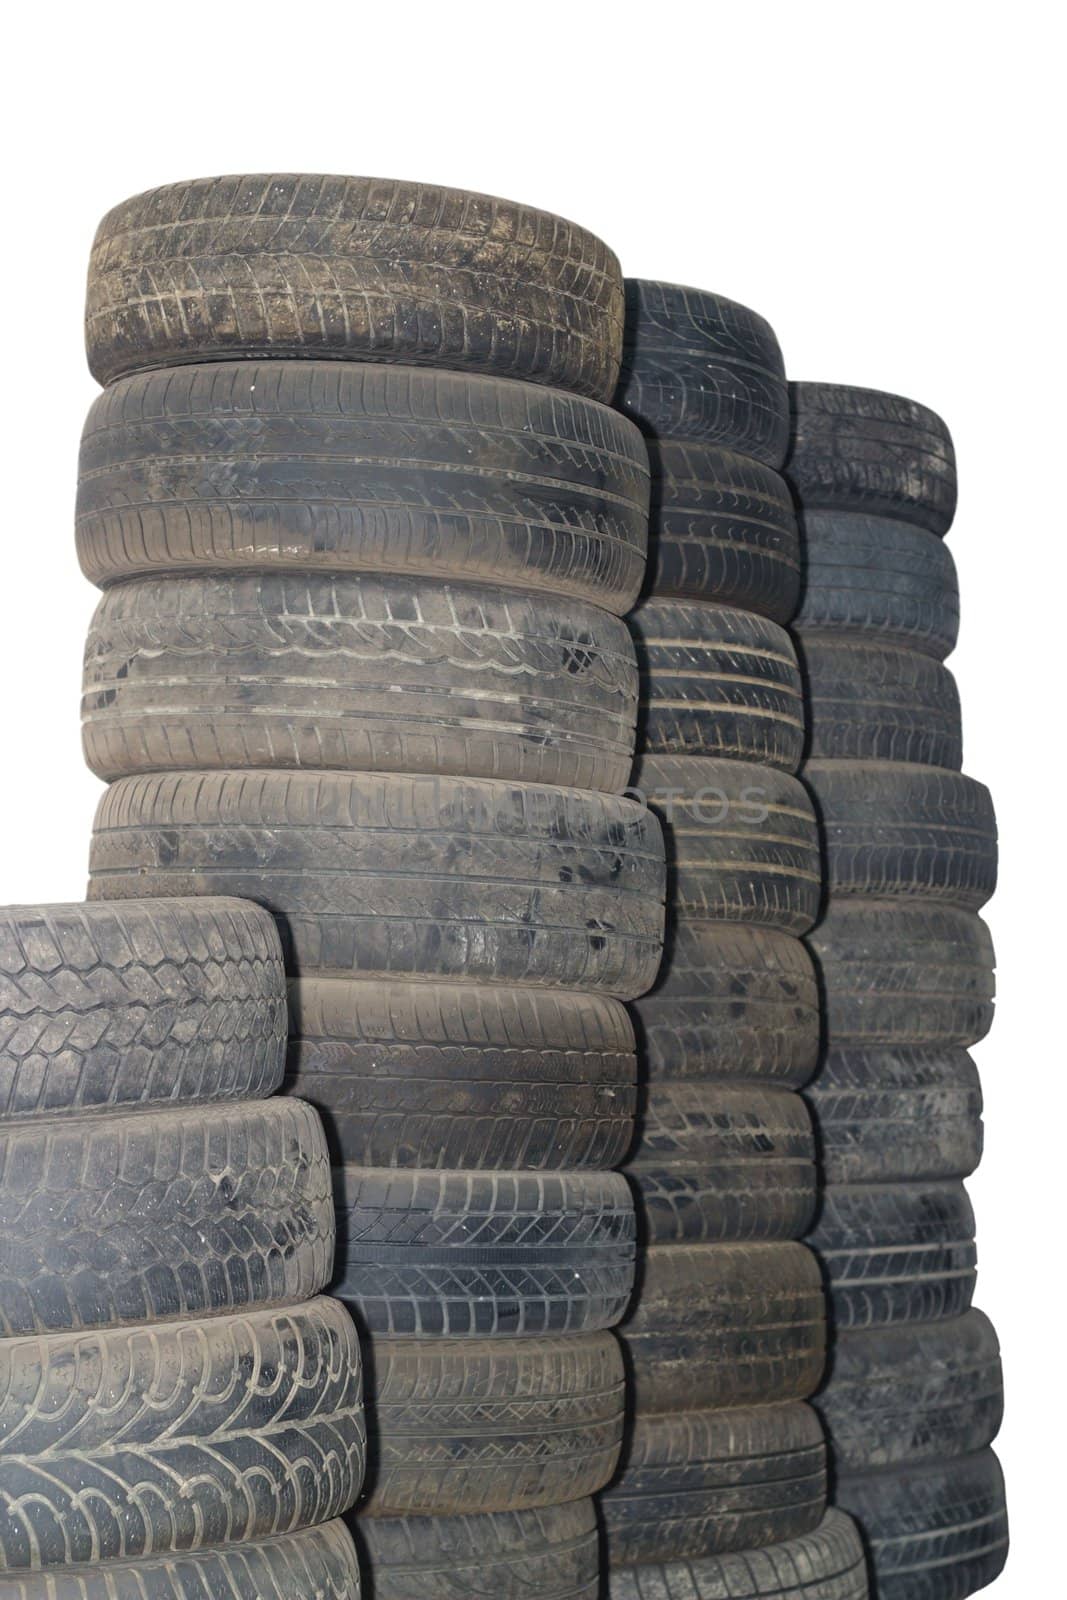 bunch of auto tires by taviphoto